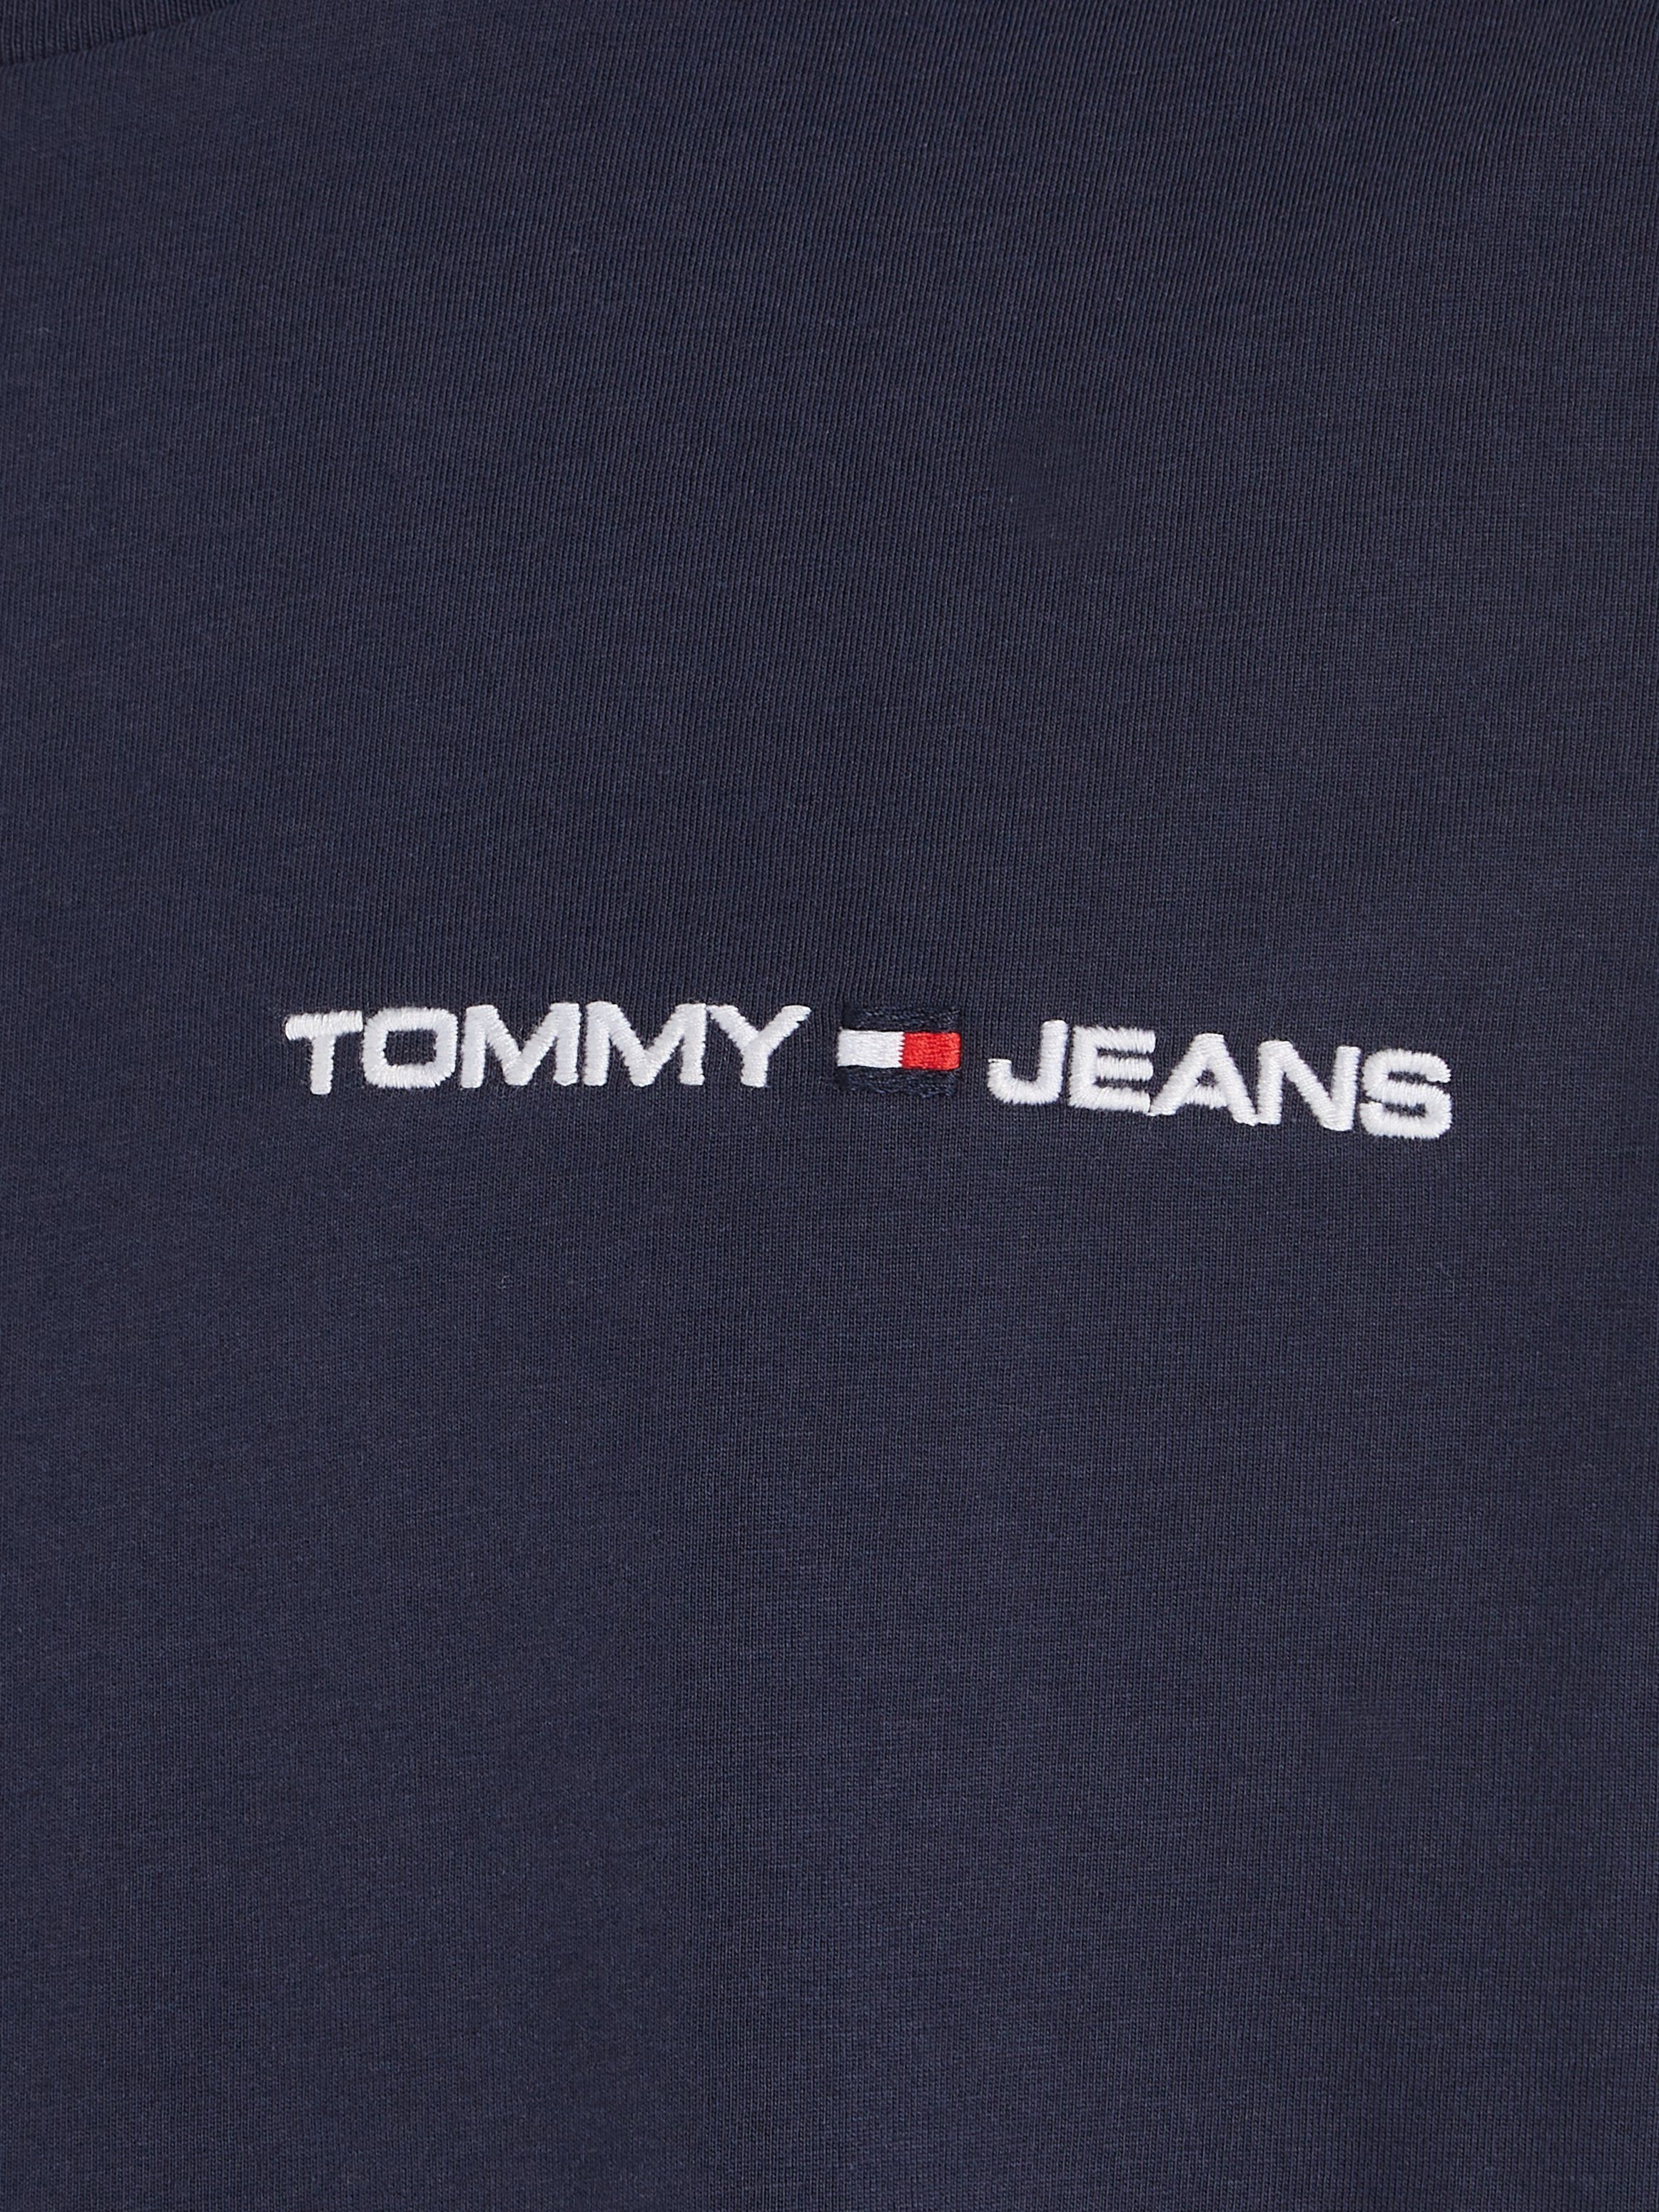 Tommy Jeans T-Shirt TEE CLSC TJM Navy Twilight CHEST LINEAR